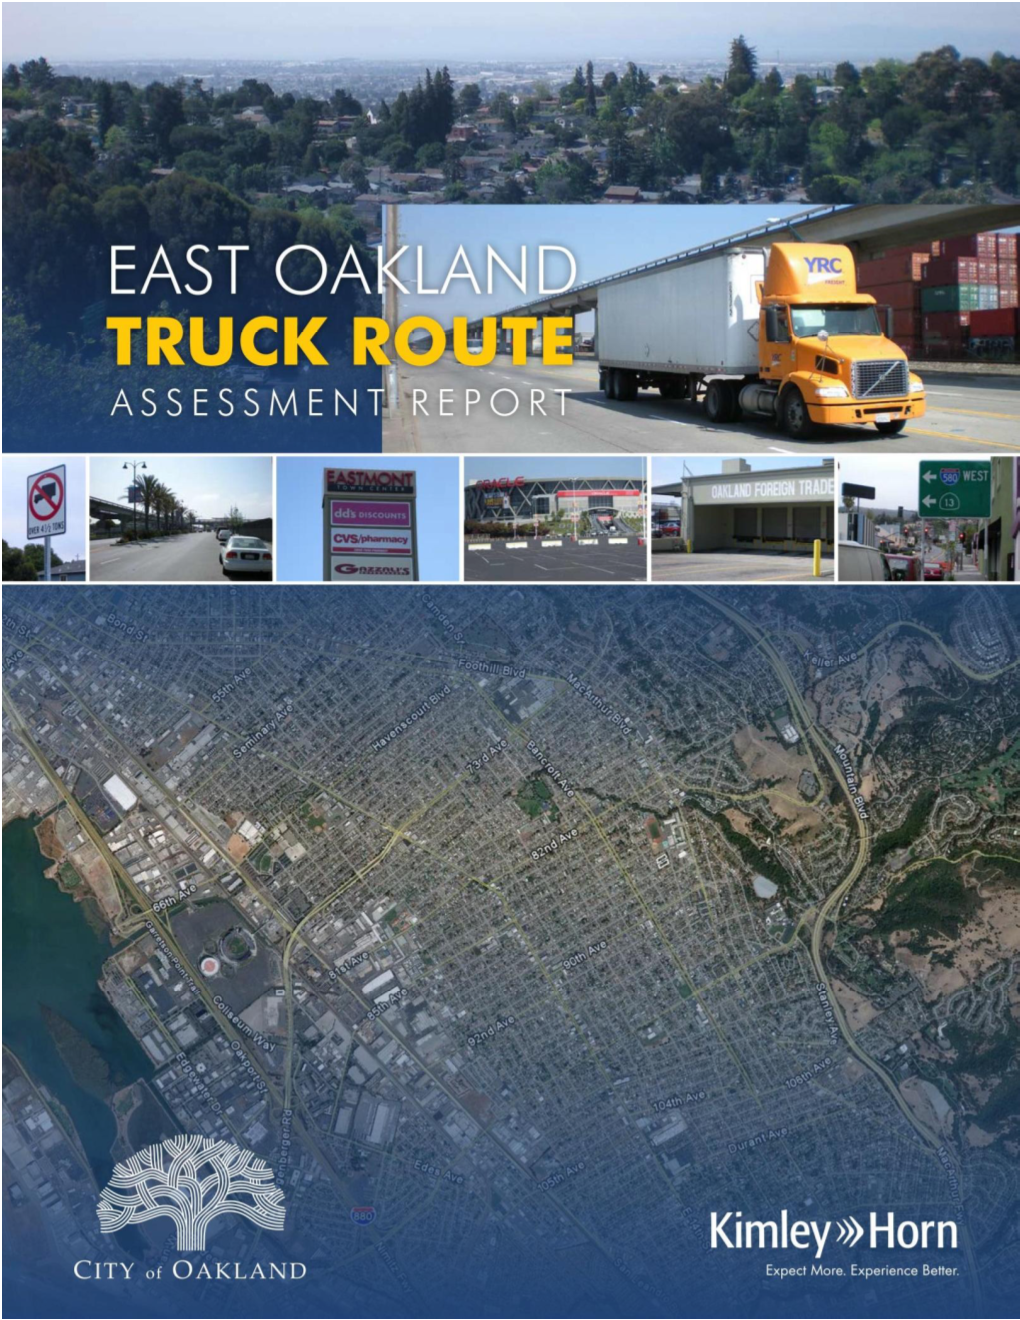 East Oakland Truck Route Assessment Report